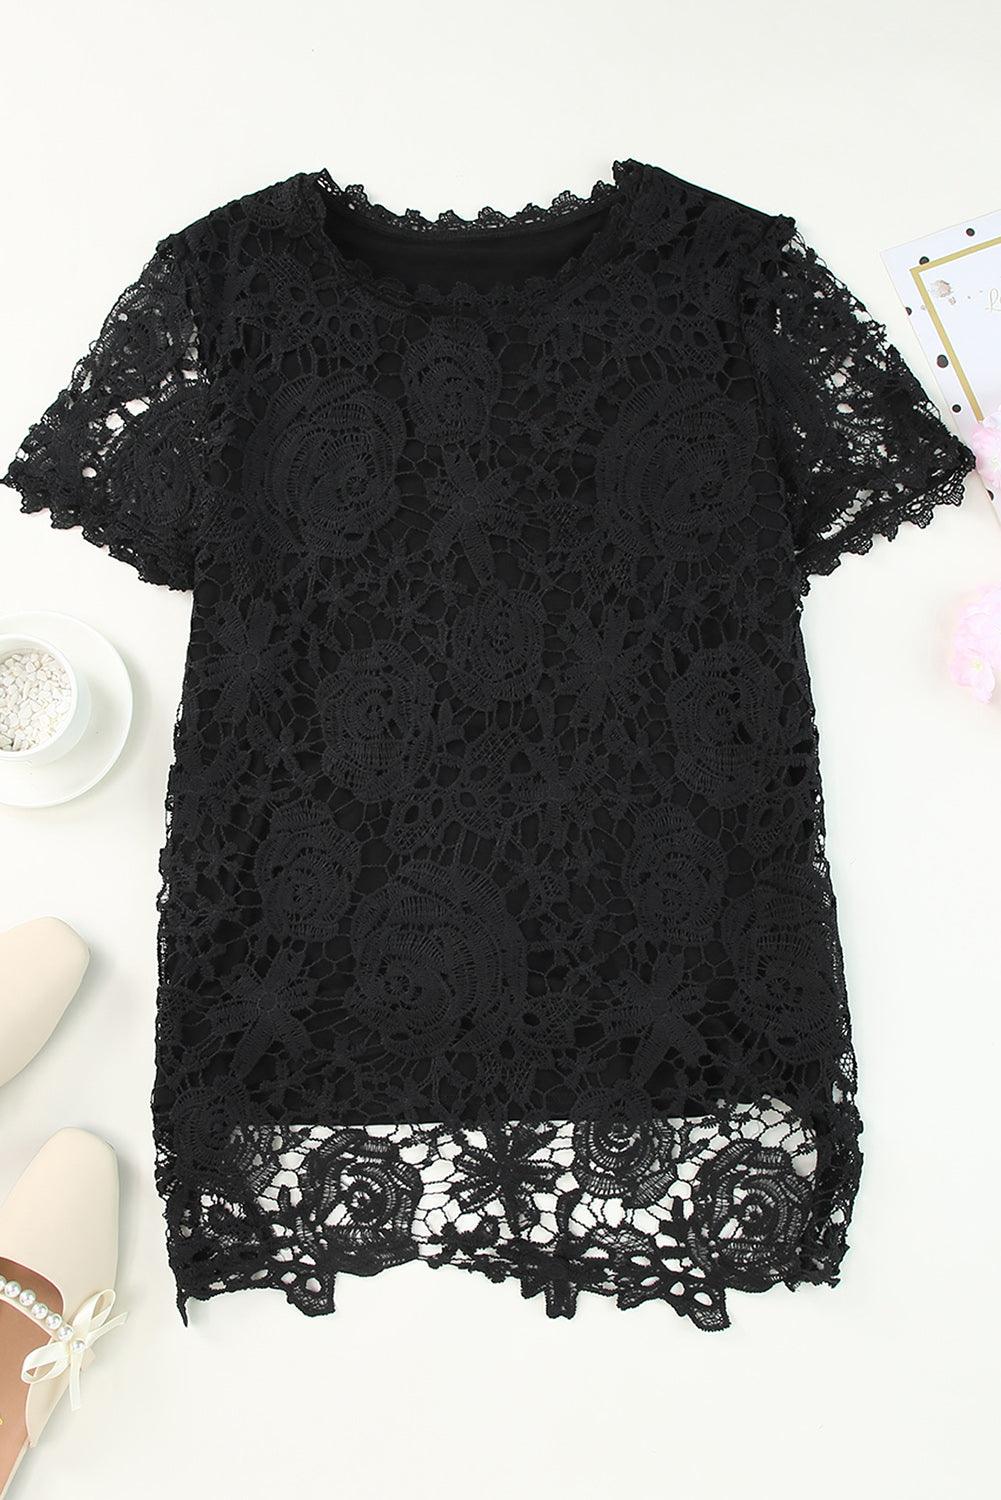 Lace Short Sleeve Summer Black Top for Women